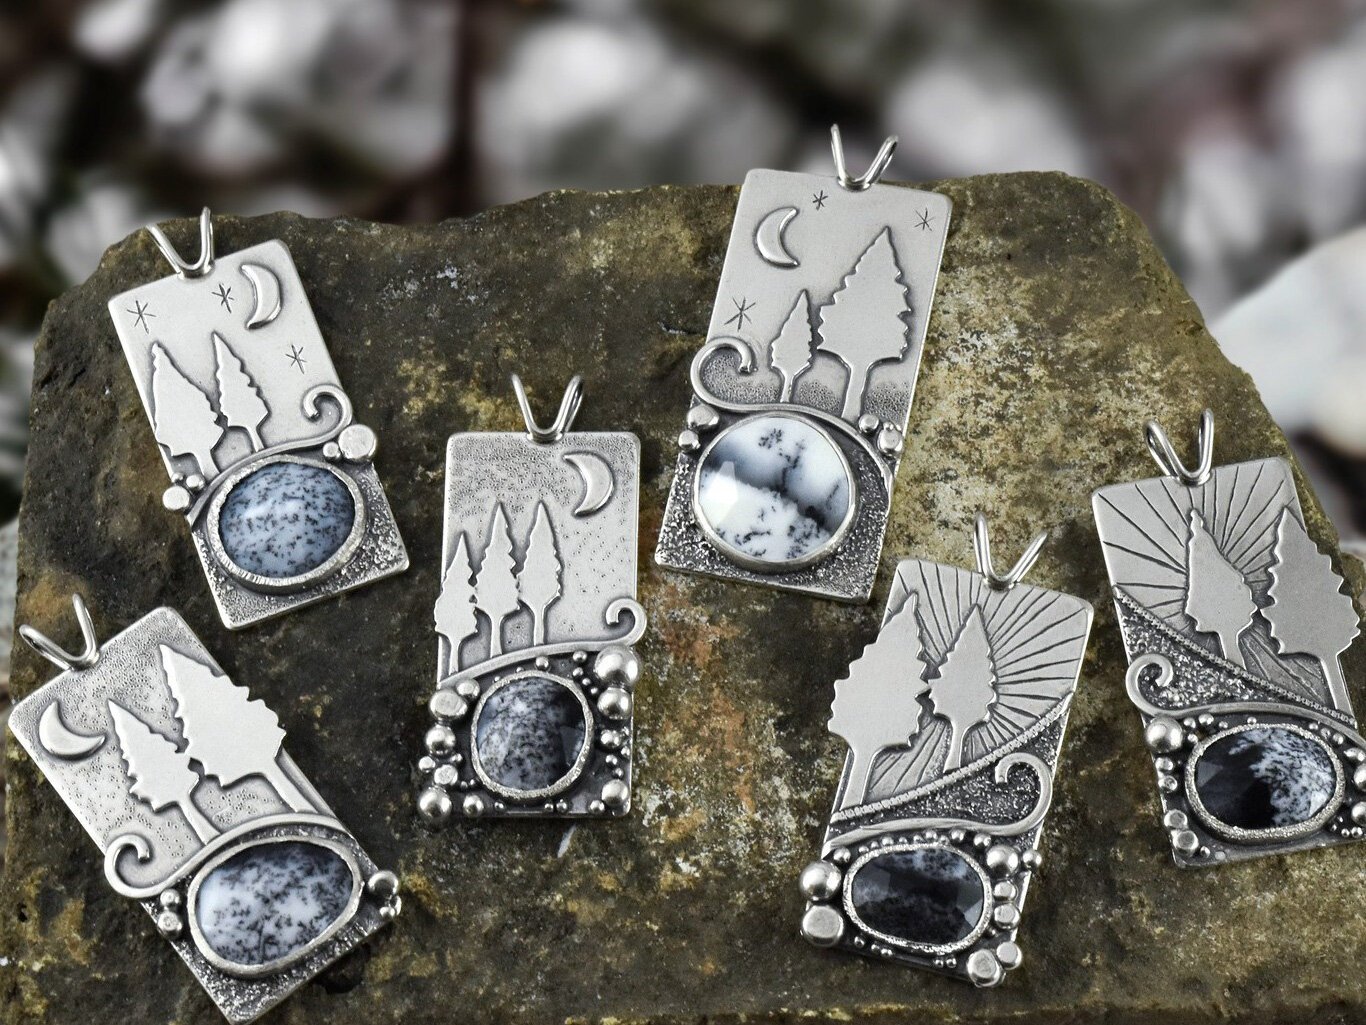 Her nature-inspired work includes these pendants.